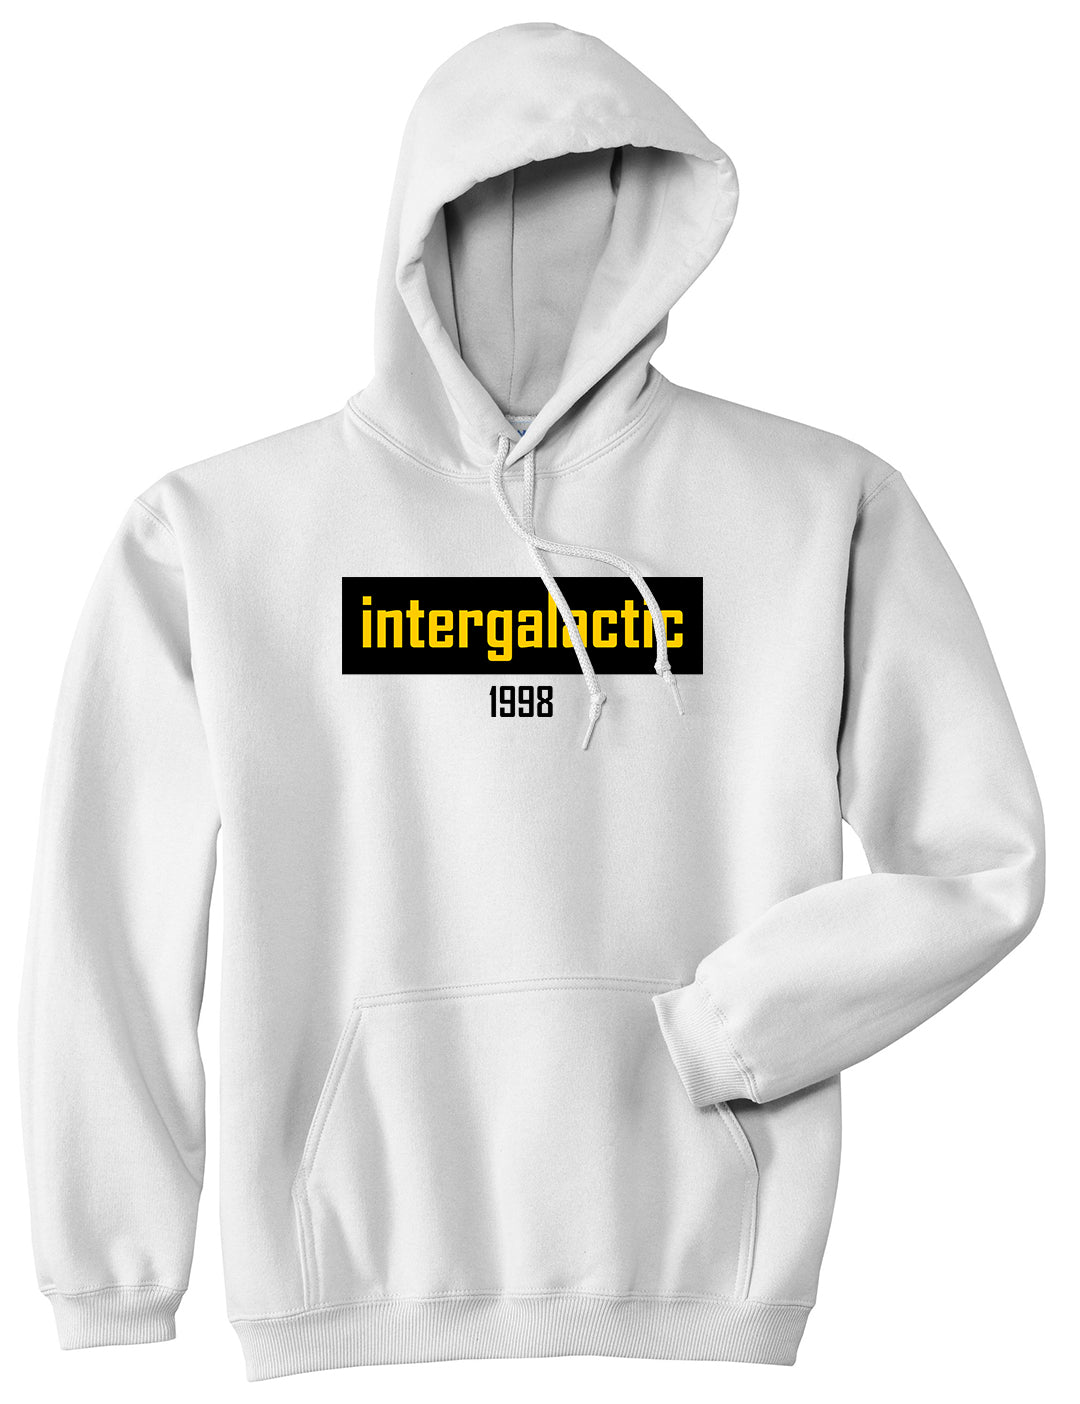 Intergalactic 1998 Hiphop Mens Pullover Hoodie White